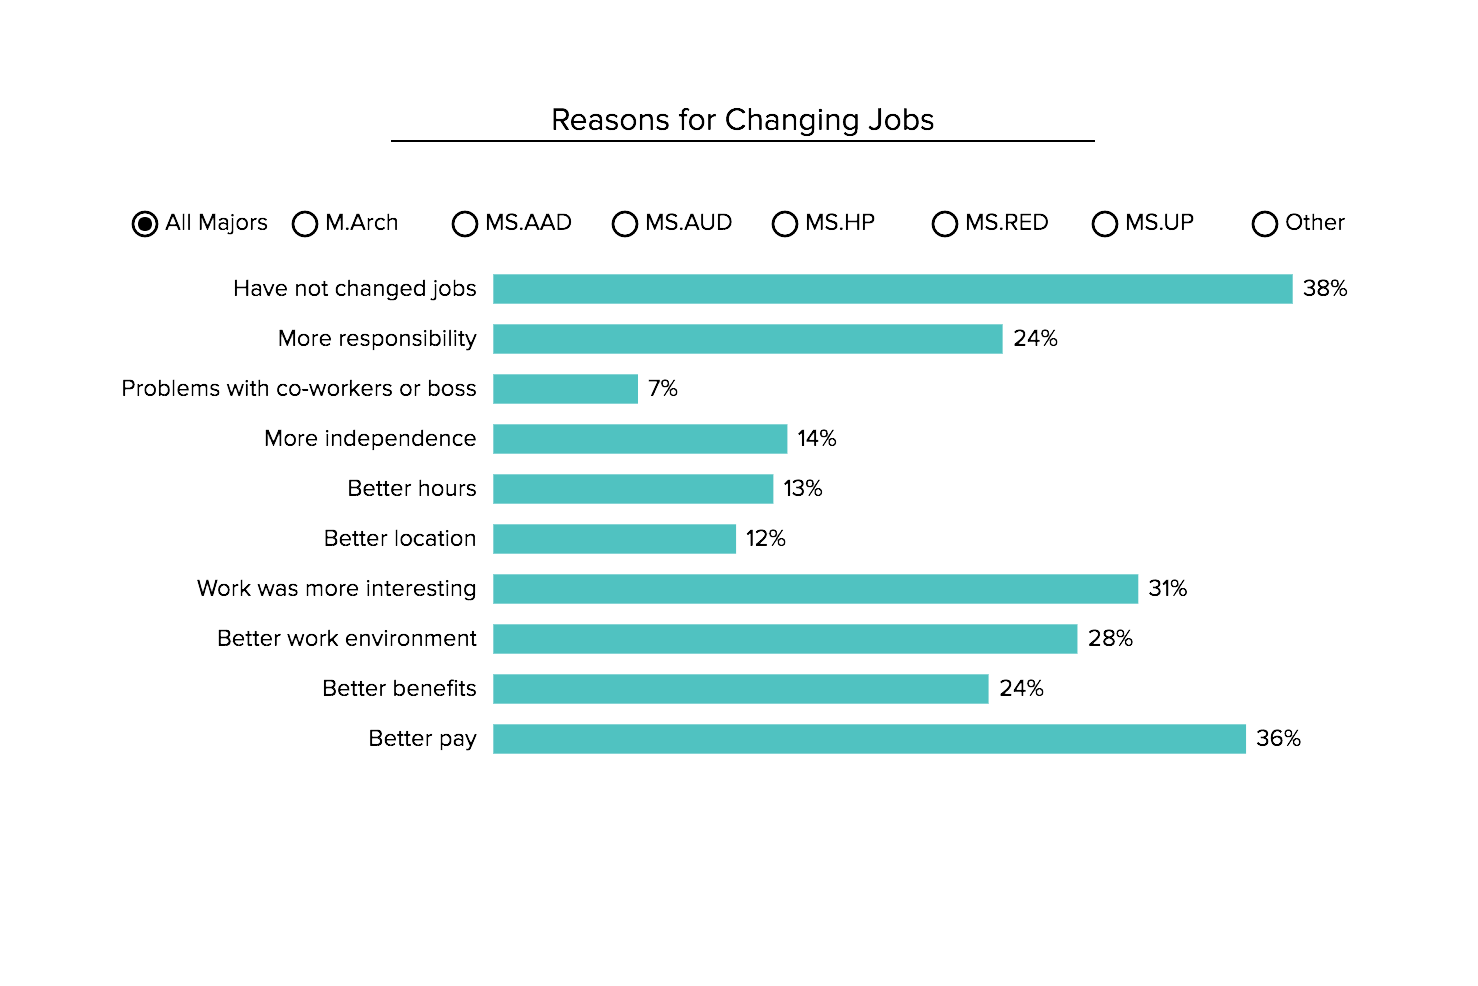 Reasons for changing jobs